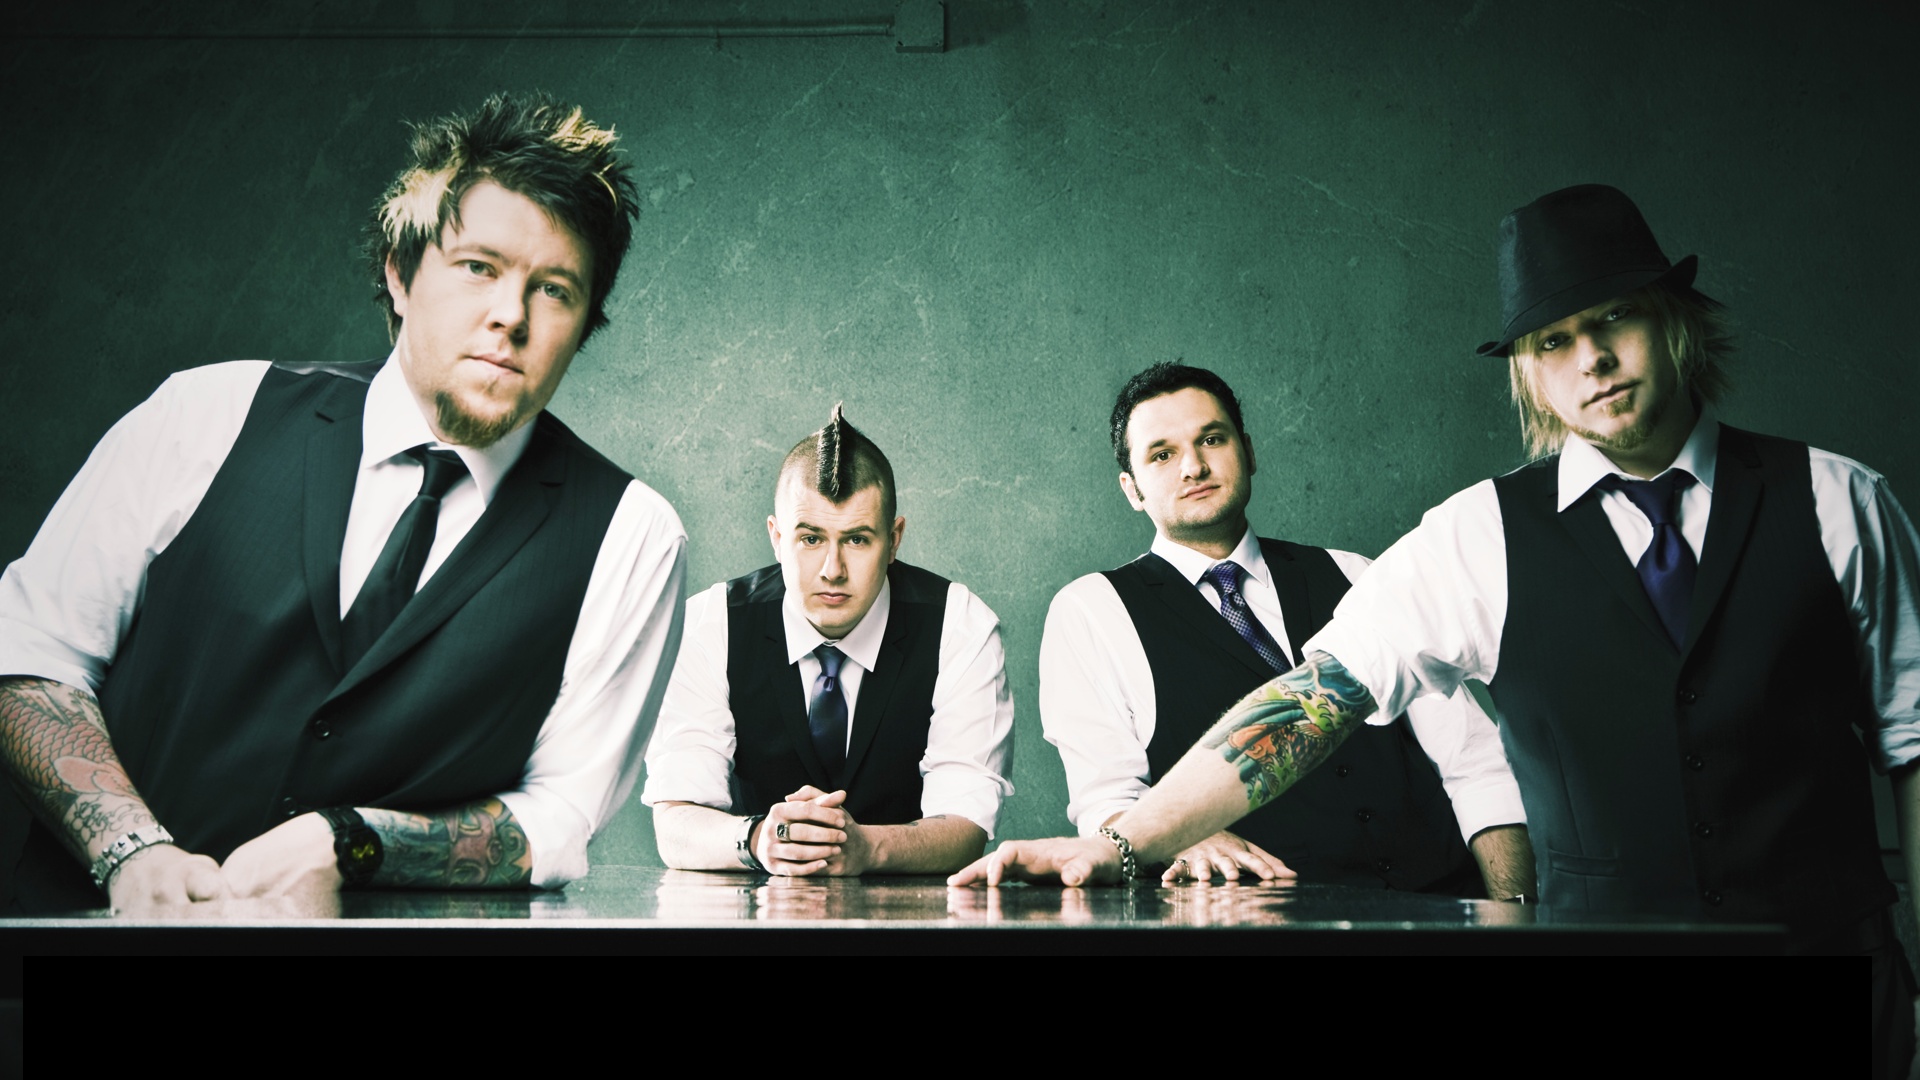 Nice Images Collection: 12 Stones Desktop Wallpapers